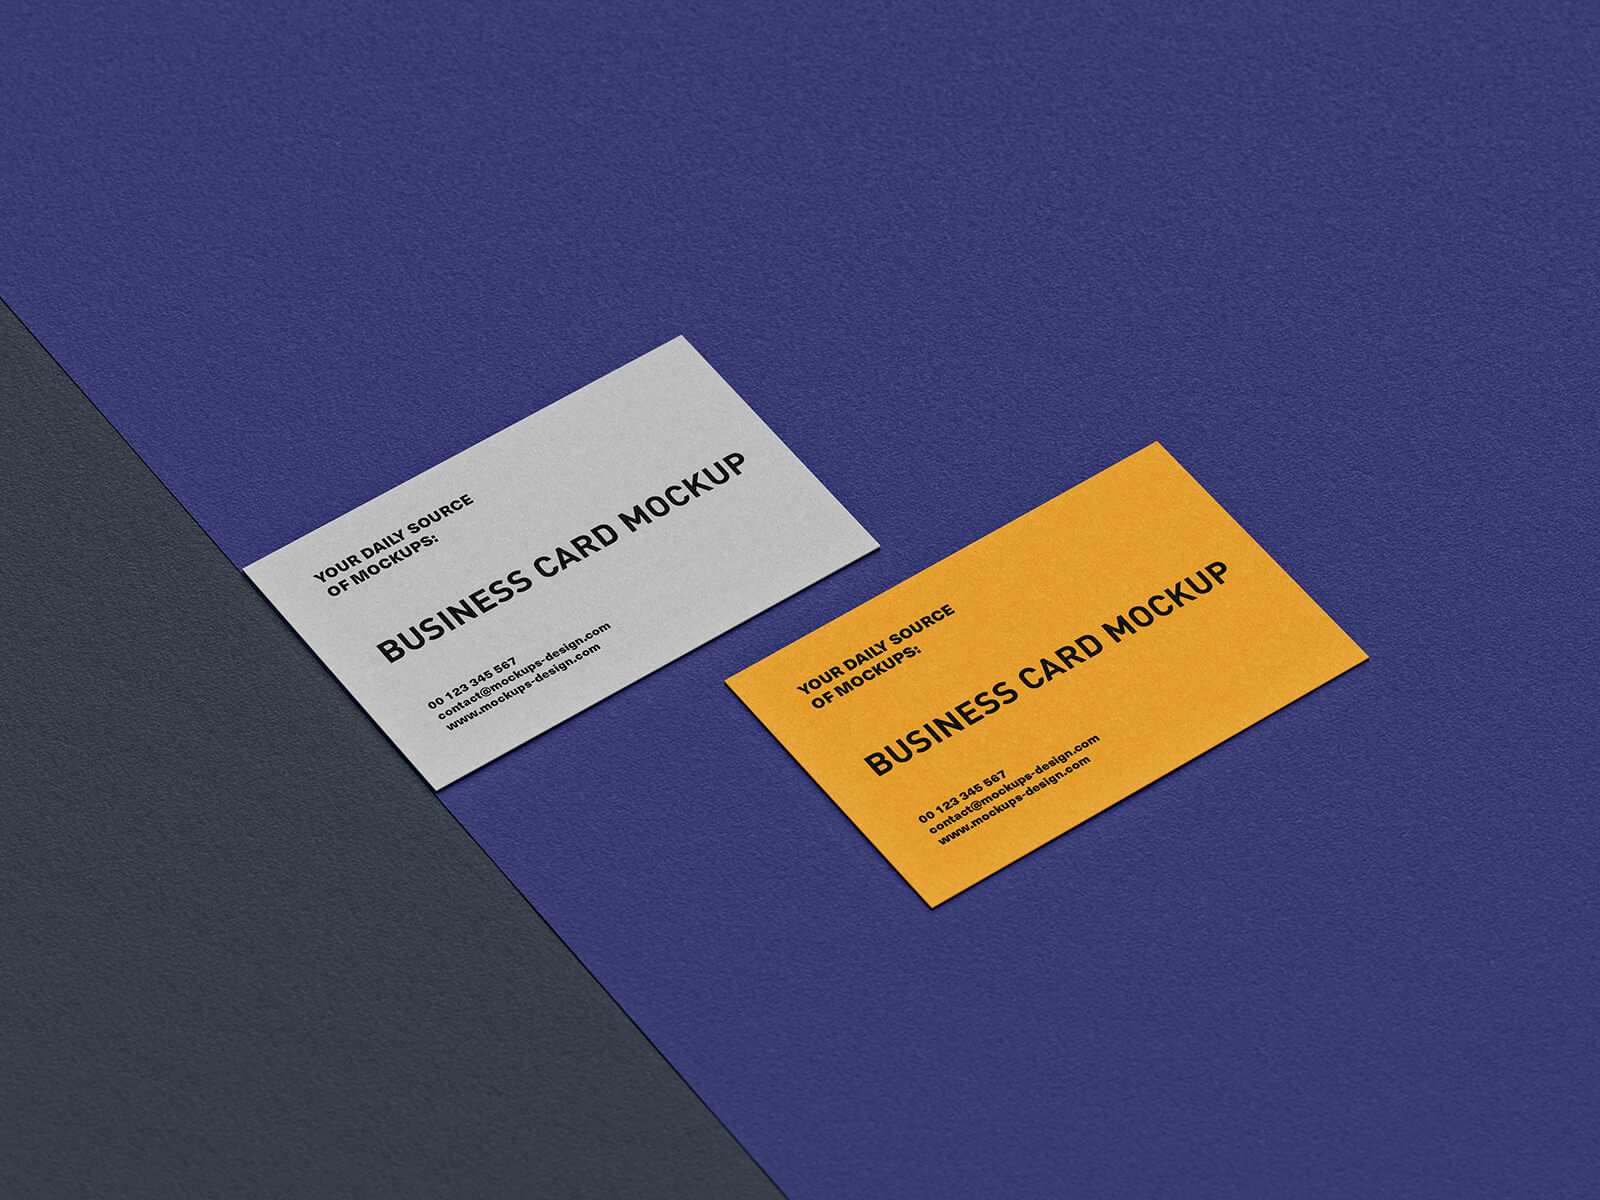 Free Business Card On Textured Paper Mockup PSD